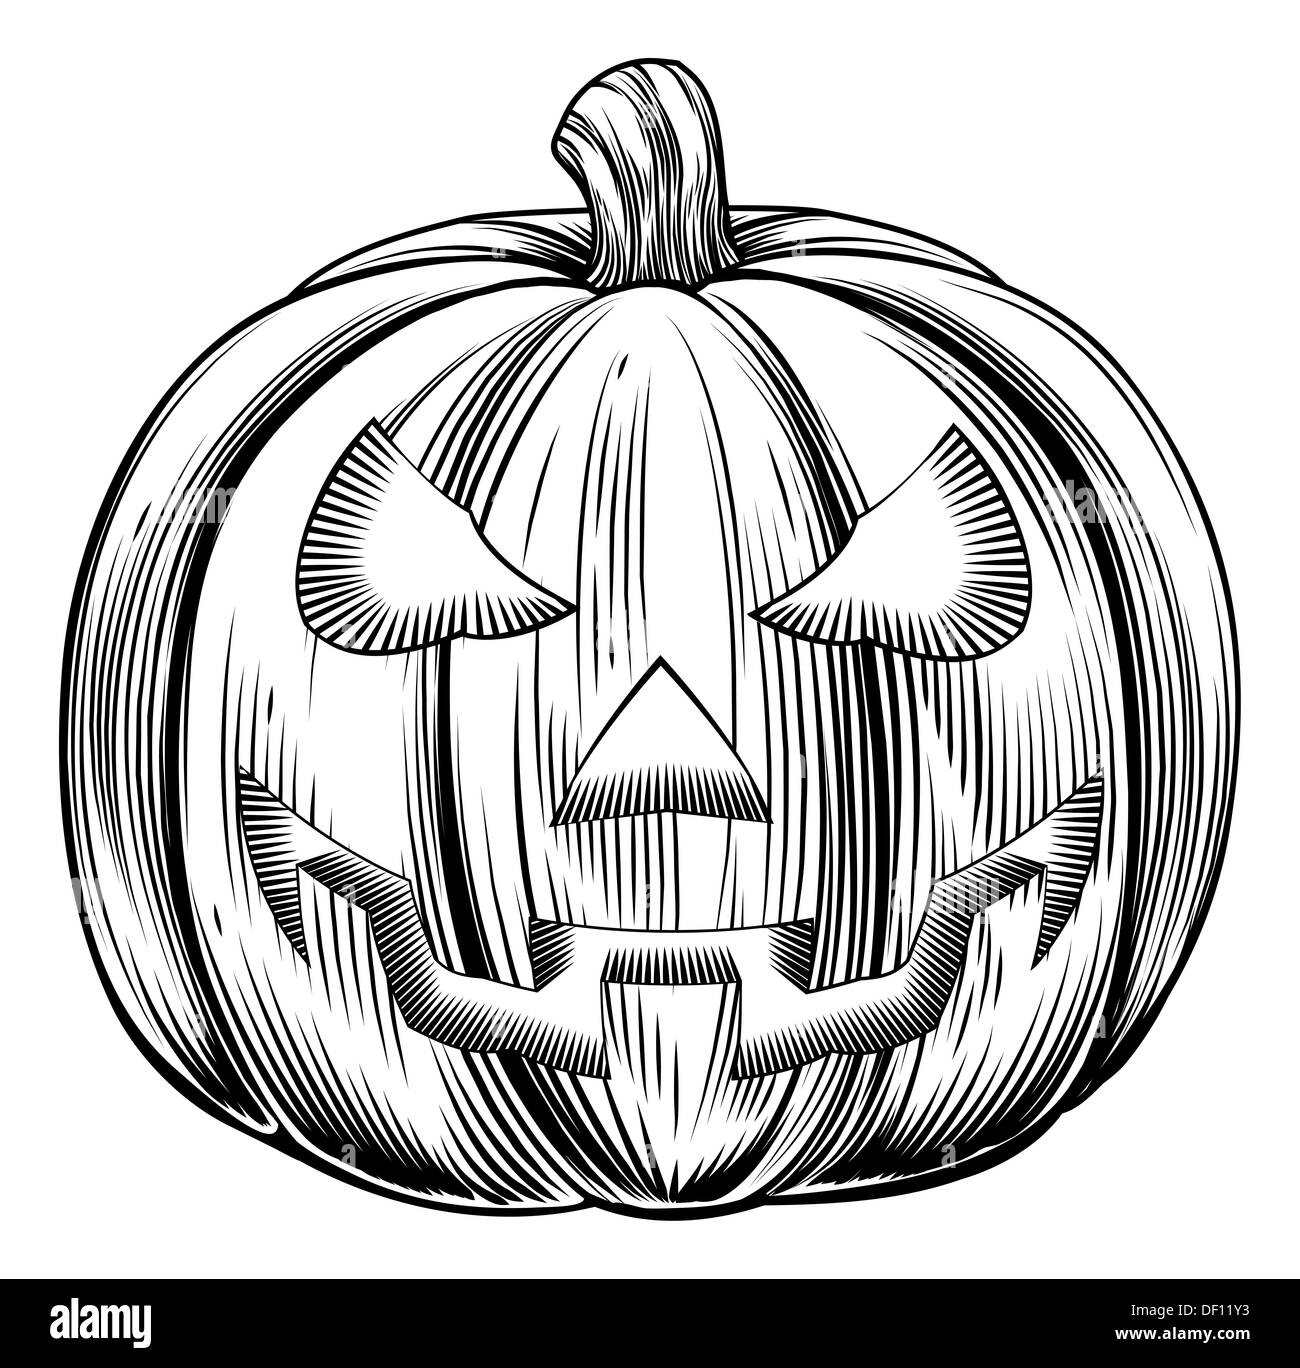 An illustration of a Halloween pumpkin in a retro vintage woodblock or woodcut etching style Stock Photo